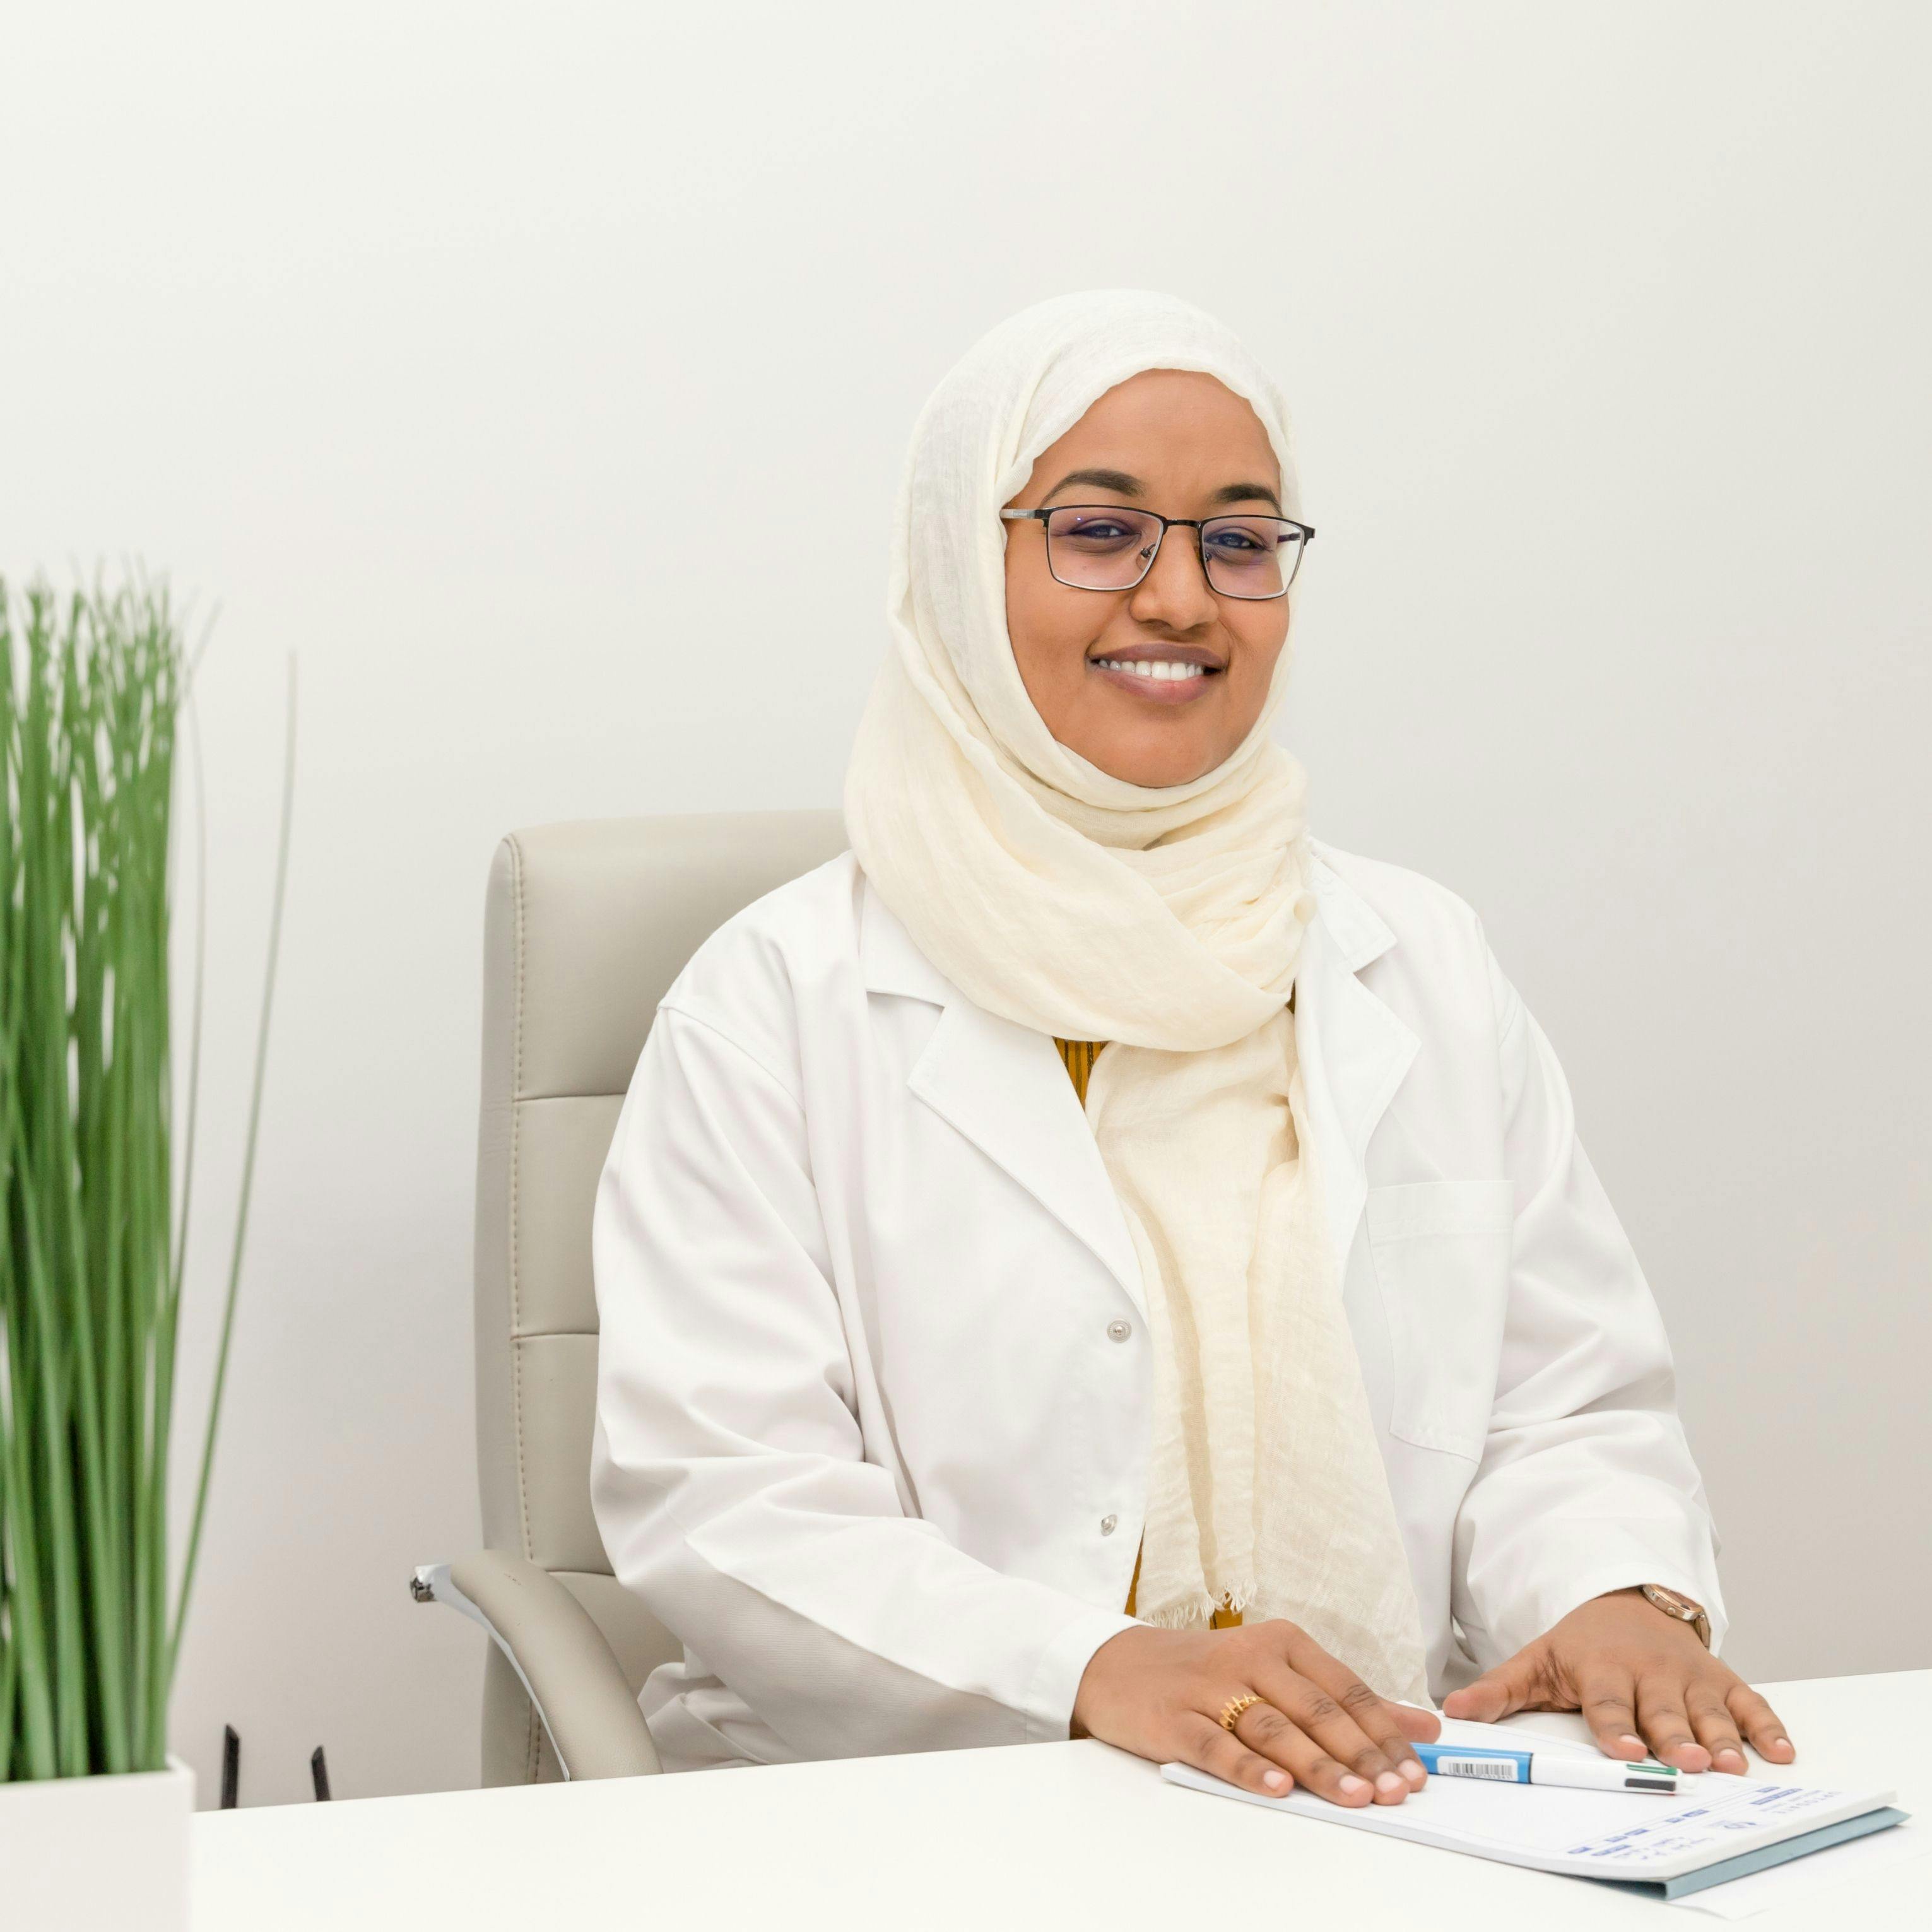 This is Dr Hala Mohamednours image